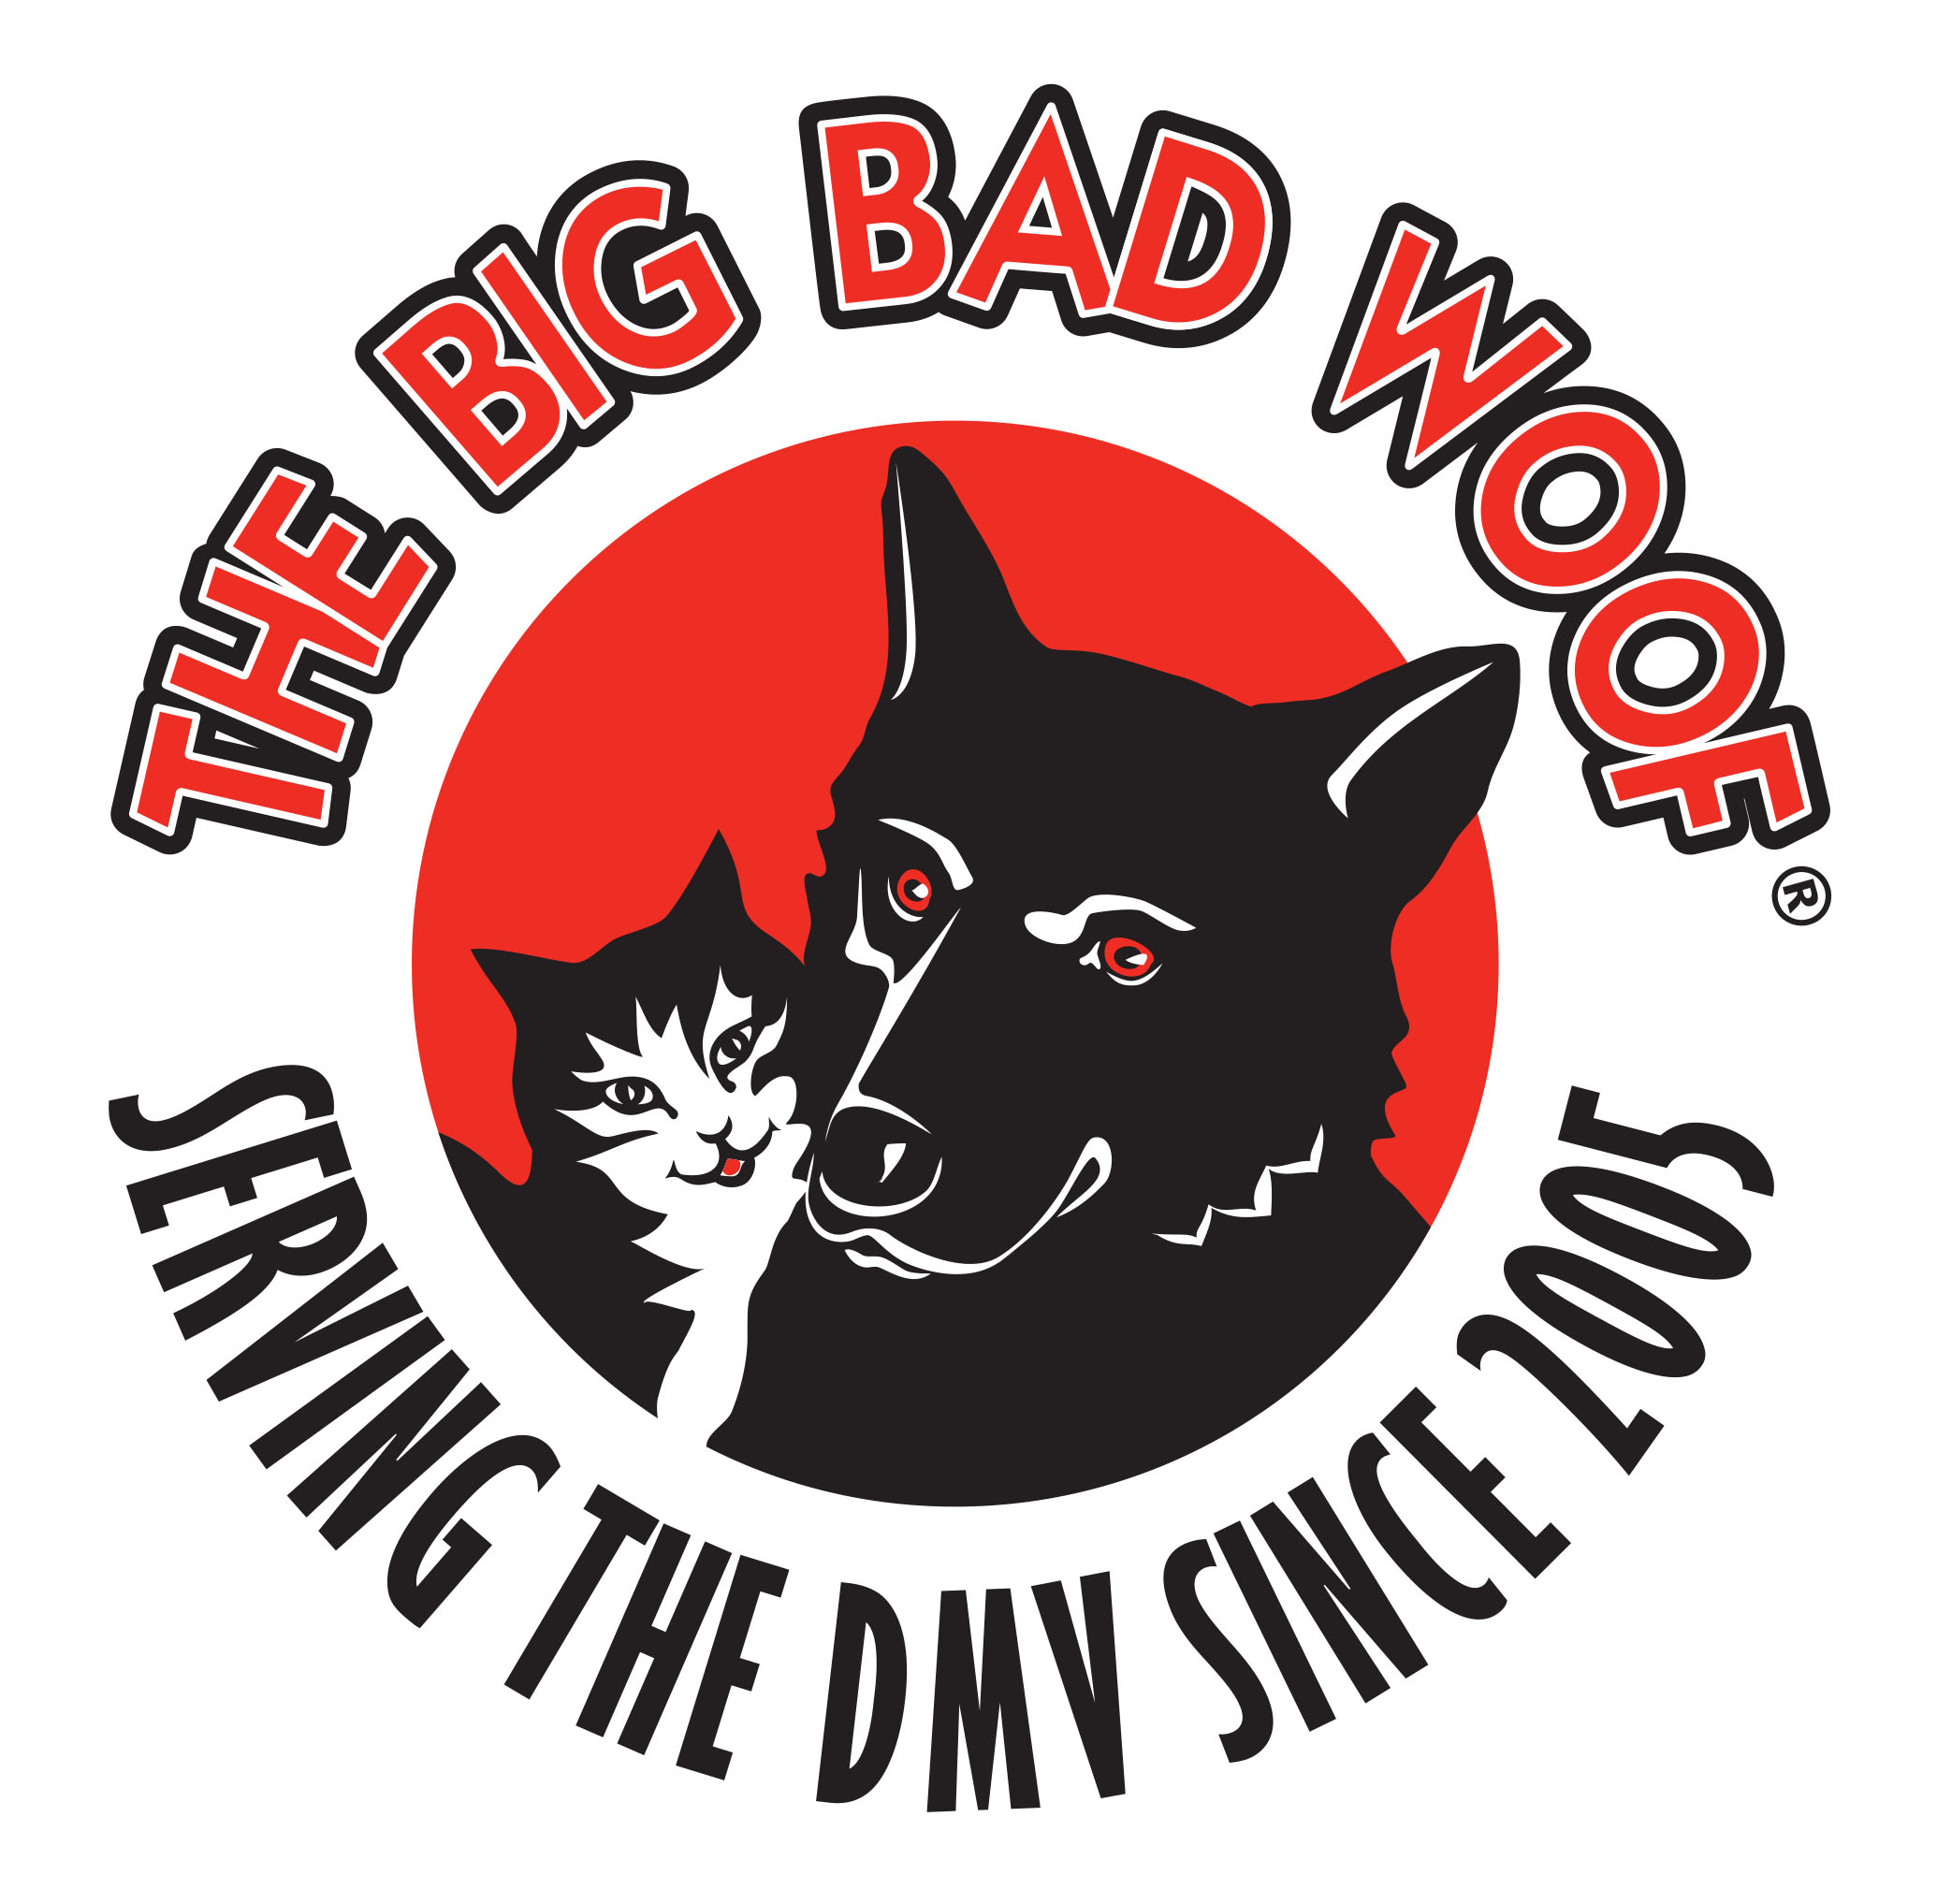 Welcome to The Woof! - The Big Bad Woof